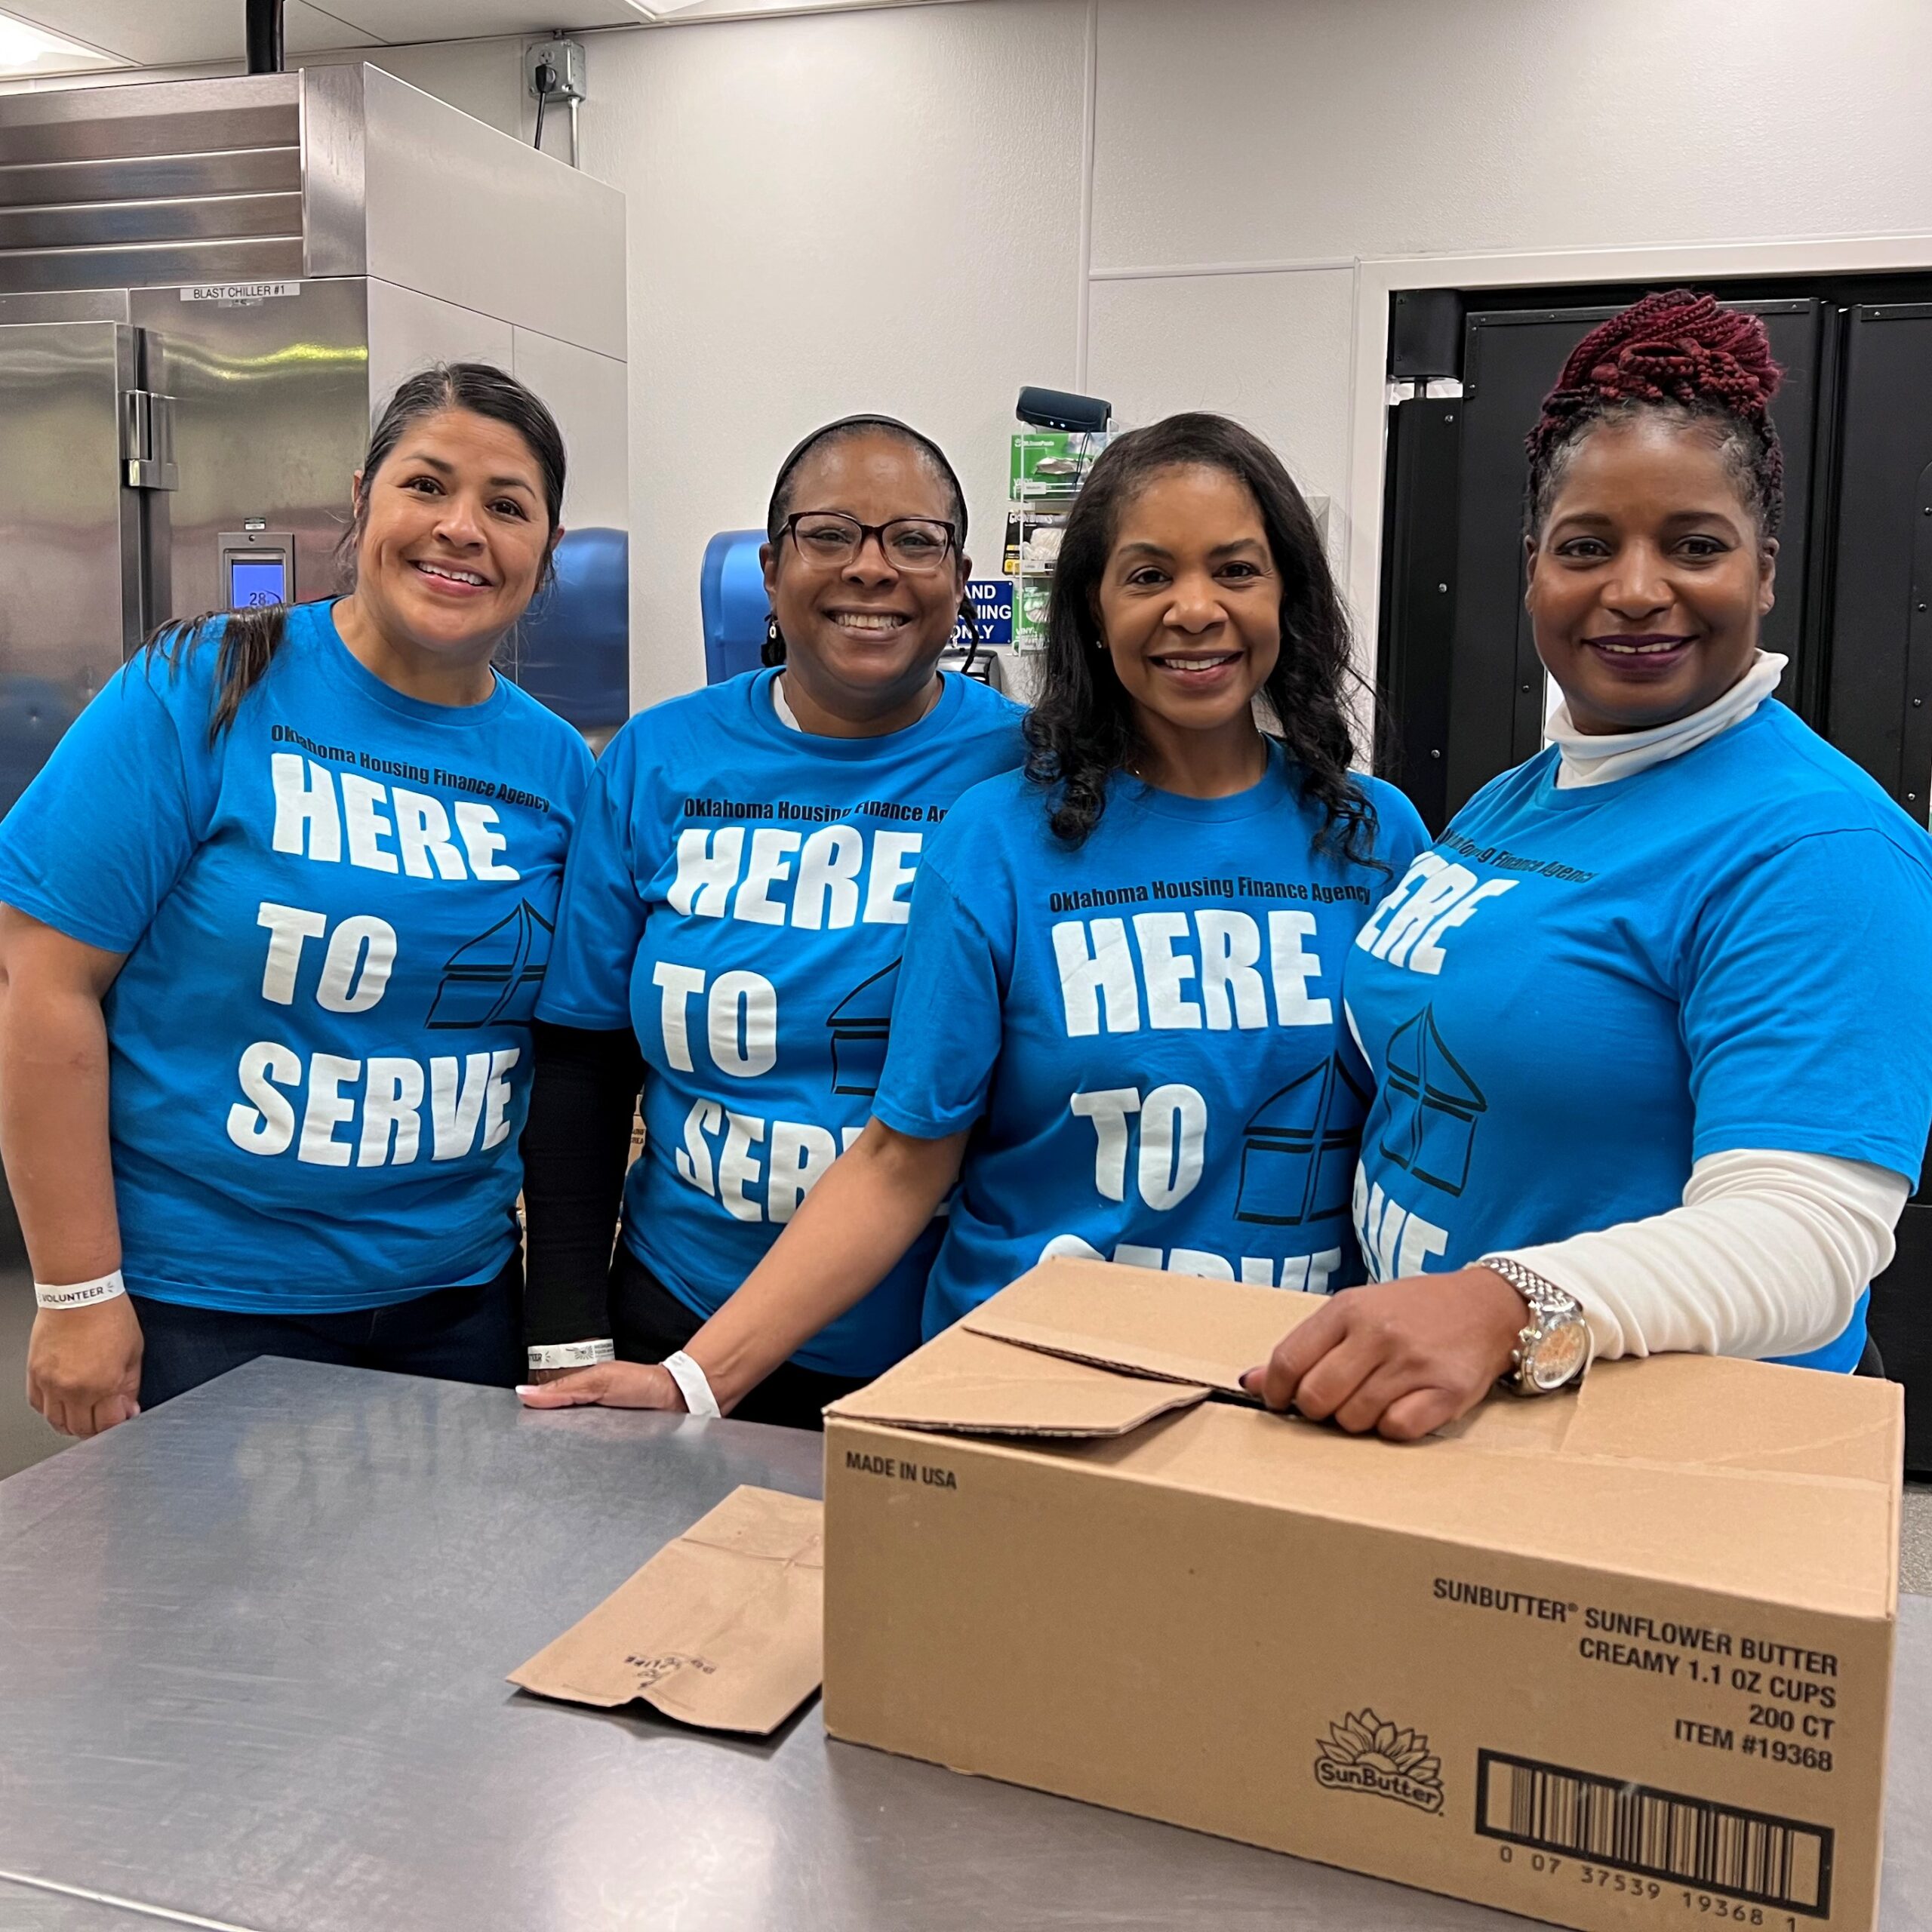 Deborah Jenkins, executive director, joins fellow staff members for OHFA Gives Back Day at the Regional Food Bank of Oklahoma. From left, Rosa, Valenthia, Deborah, and Kathy.